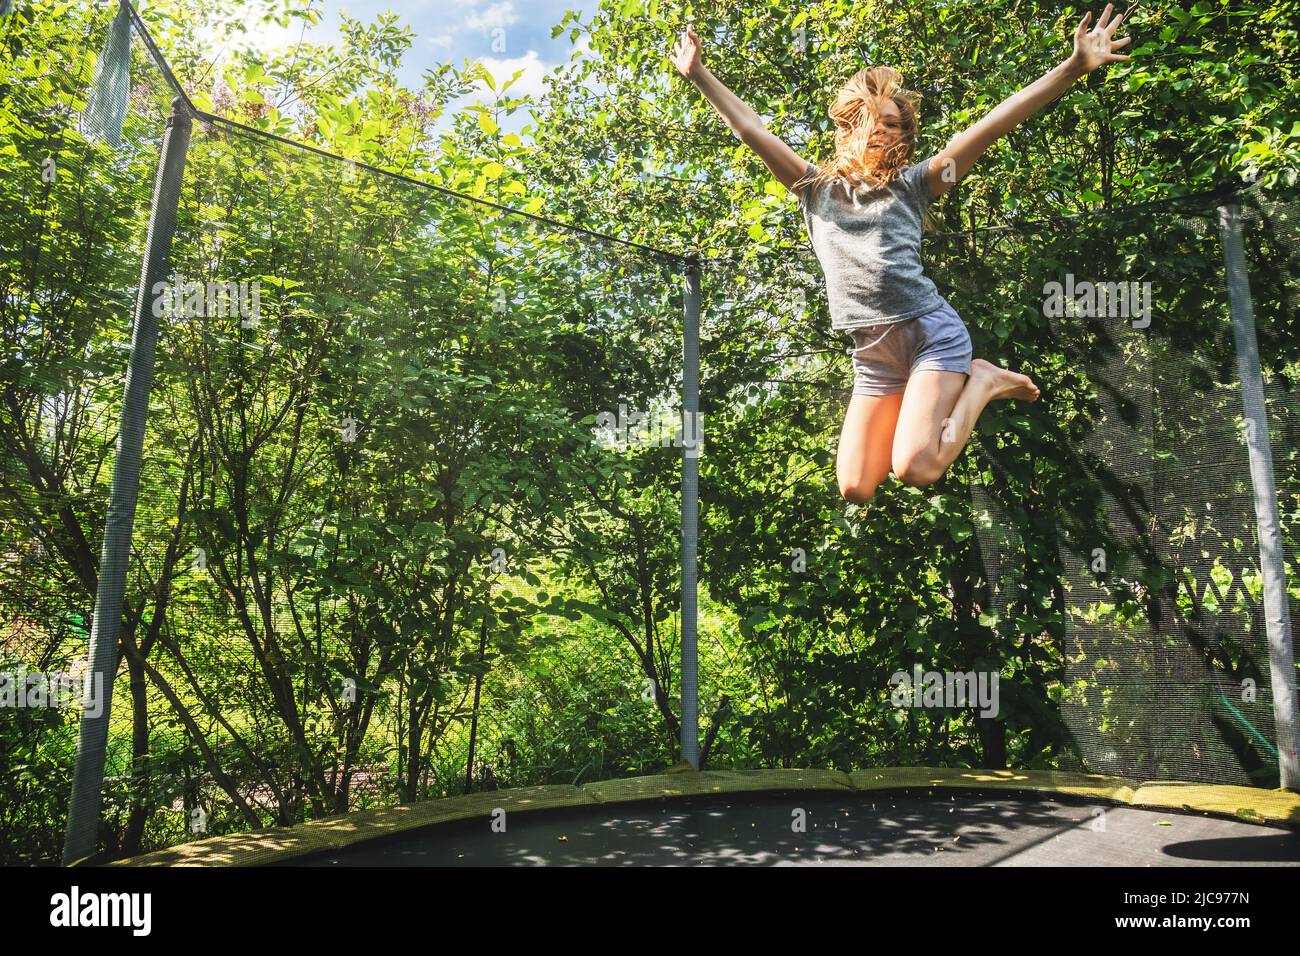 Preteen girl having fun bouncing on a trampoline in a backyard on a summer day Stock Photo